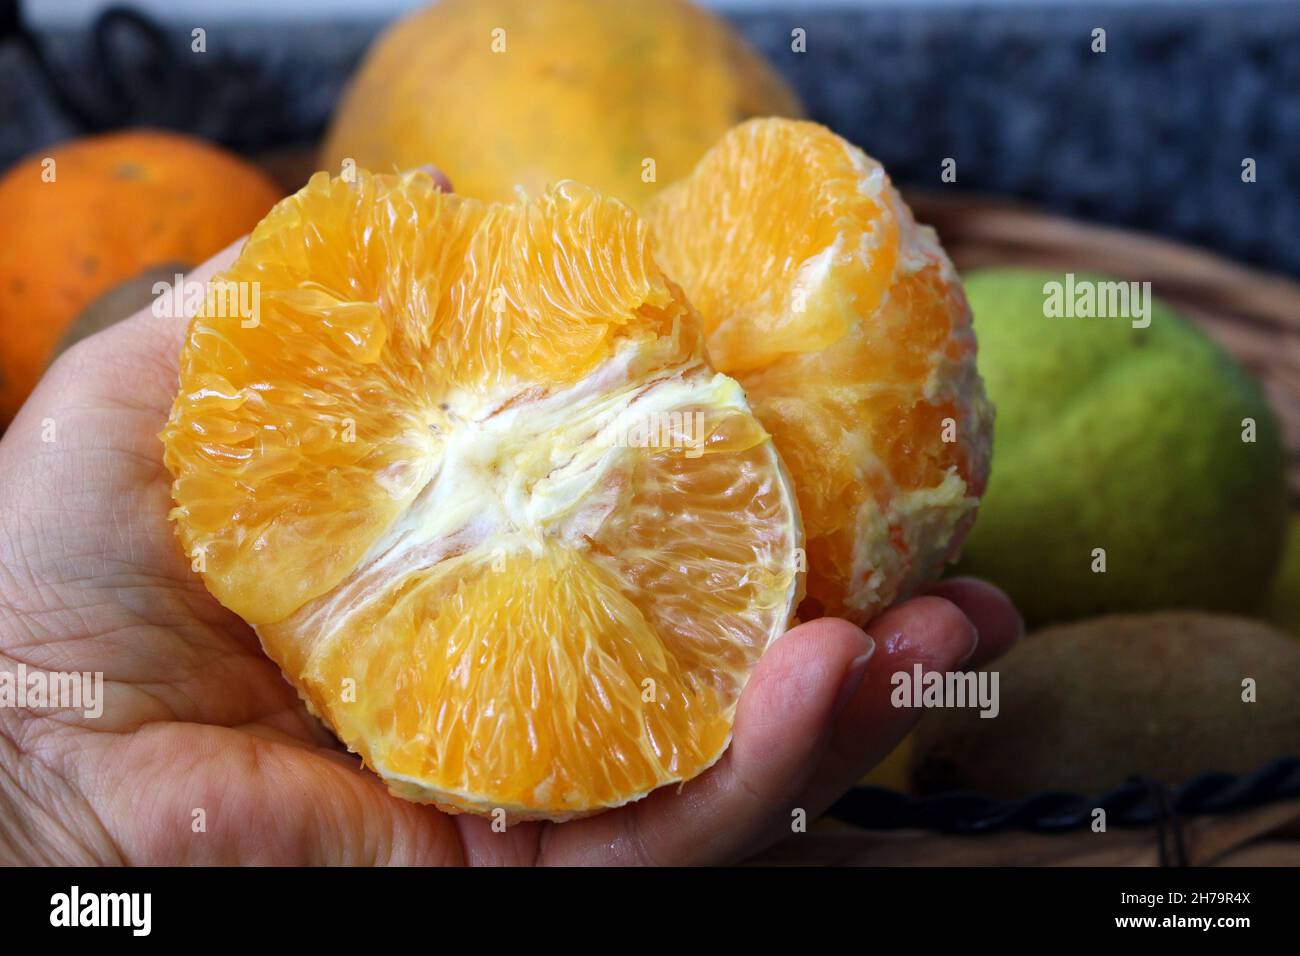 A peeled orange in a person's hand.  Tropical fruits always present in Brazilian homes. Stock Photo